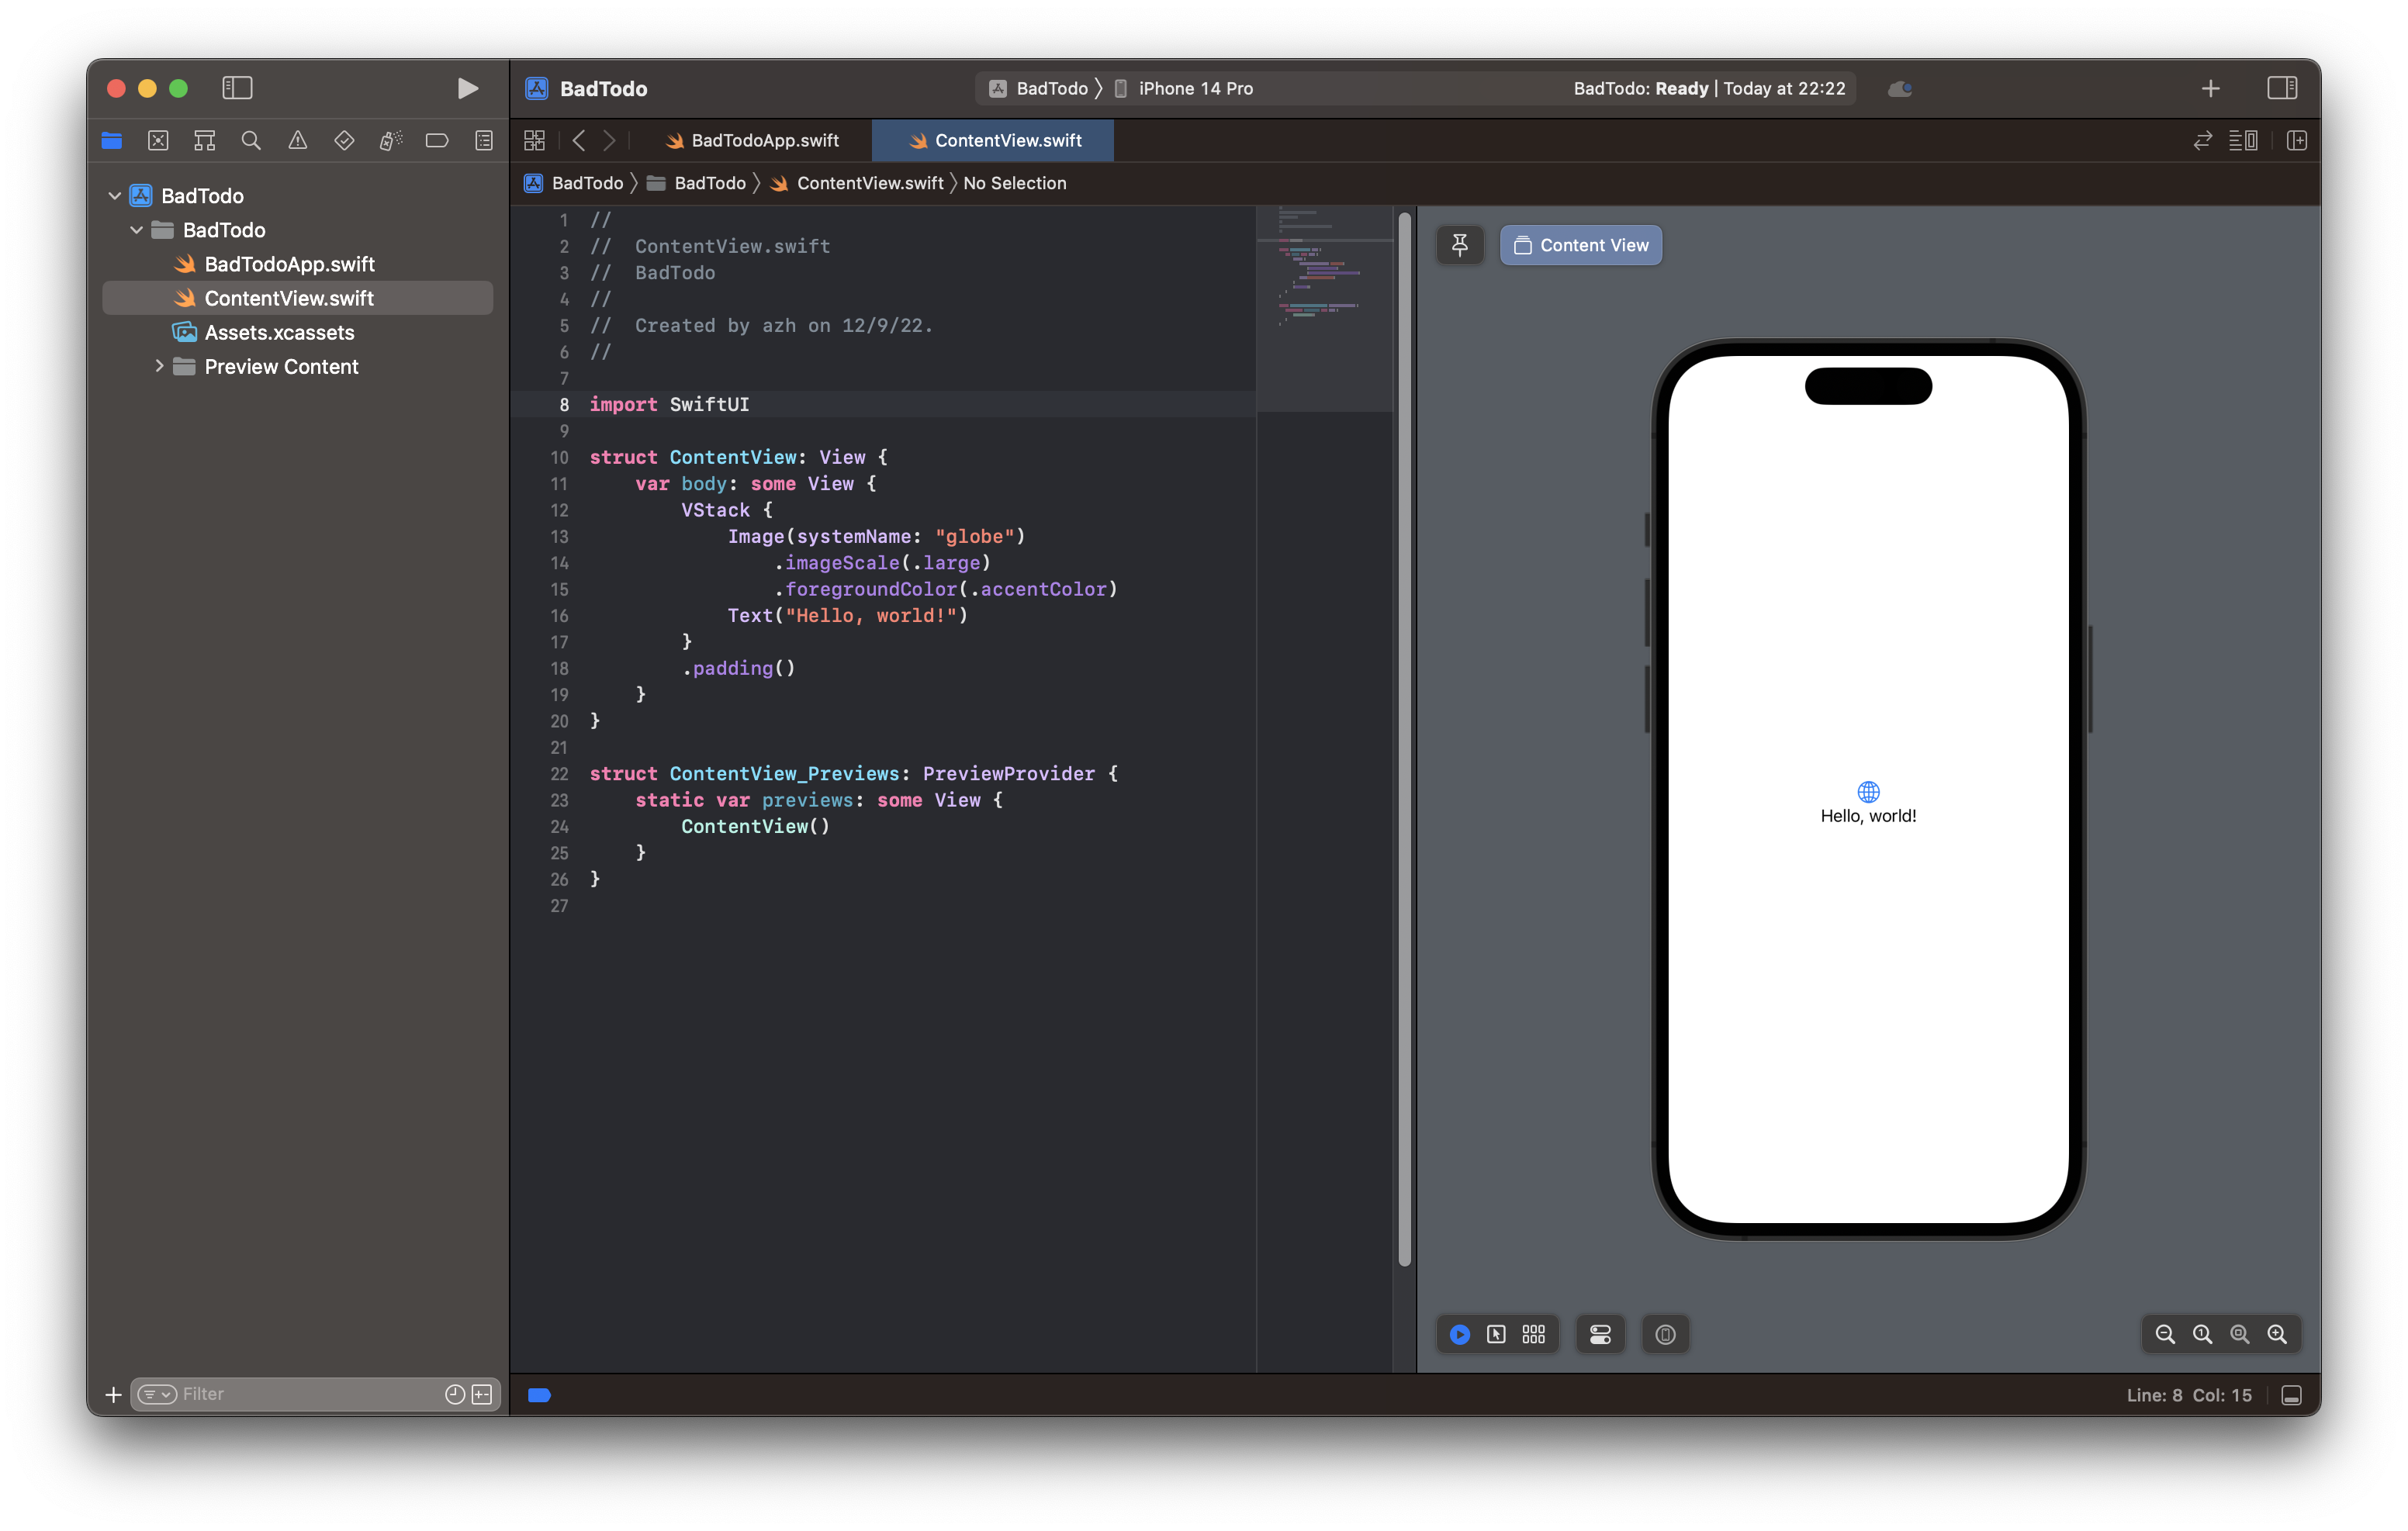 XCode showing the code and running app for a hello world demo.